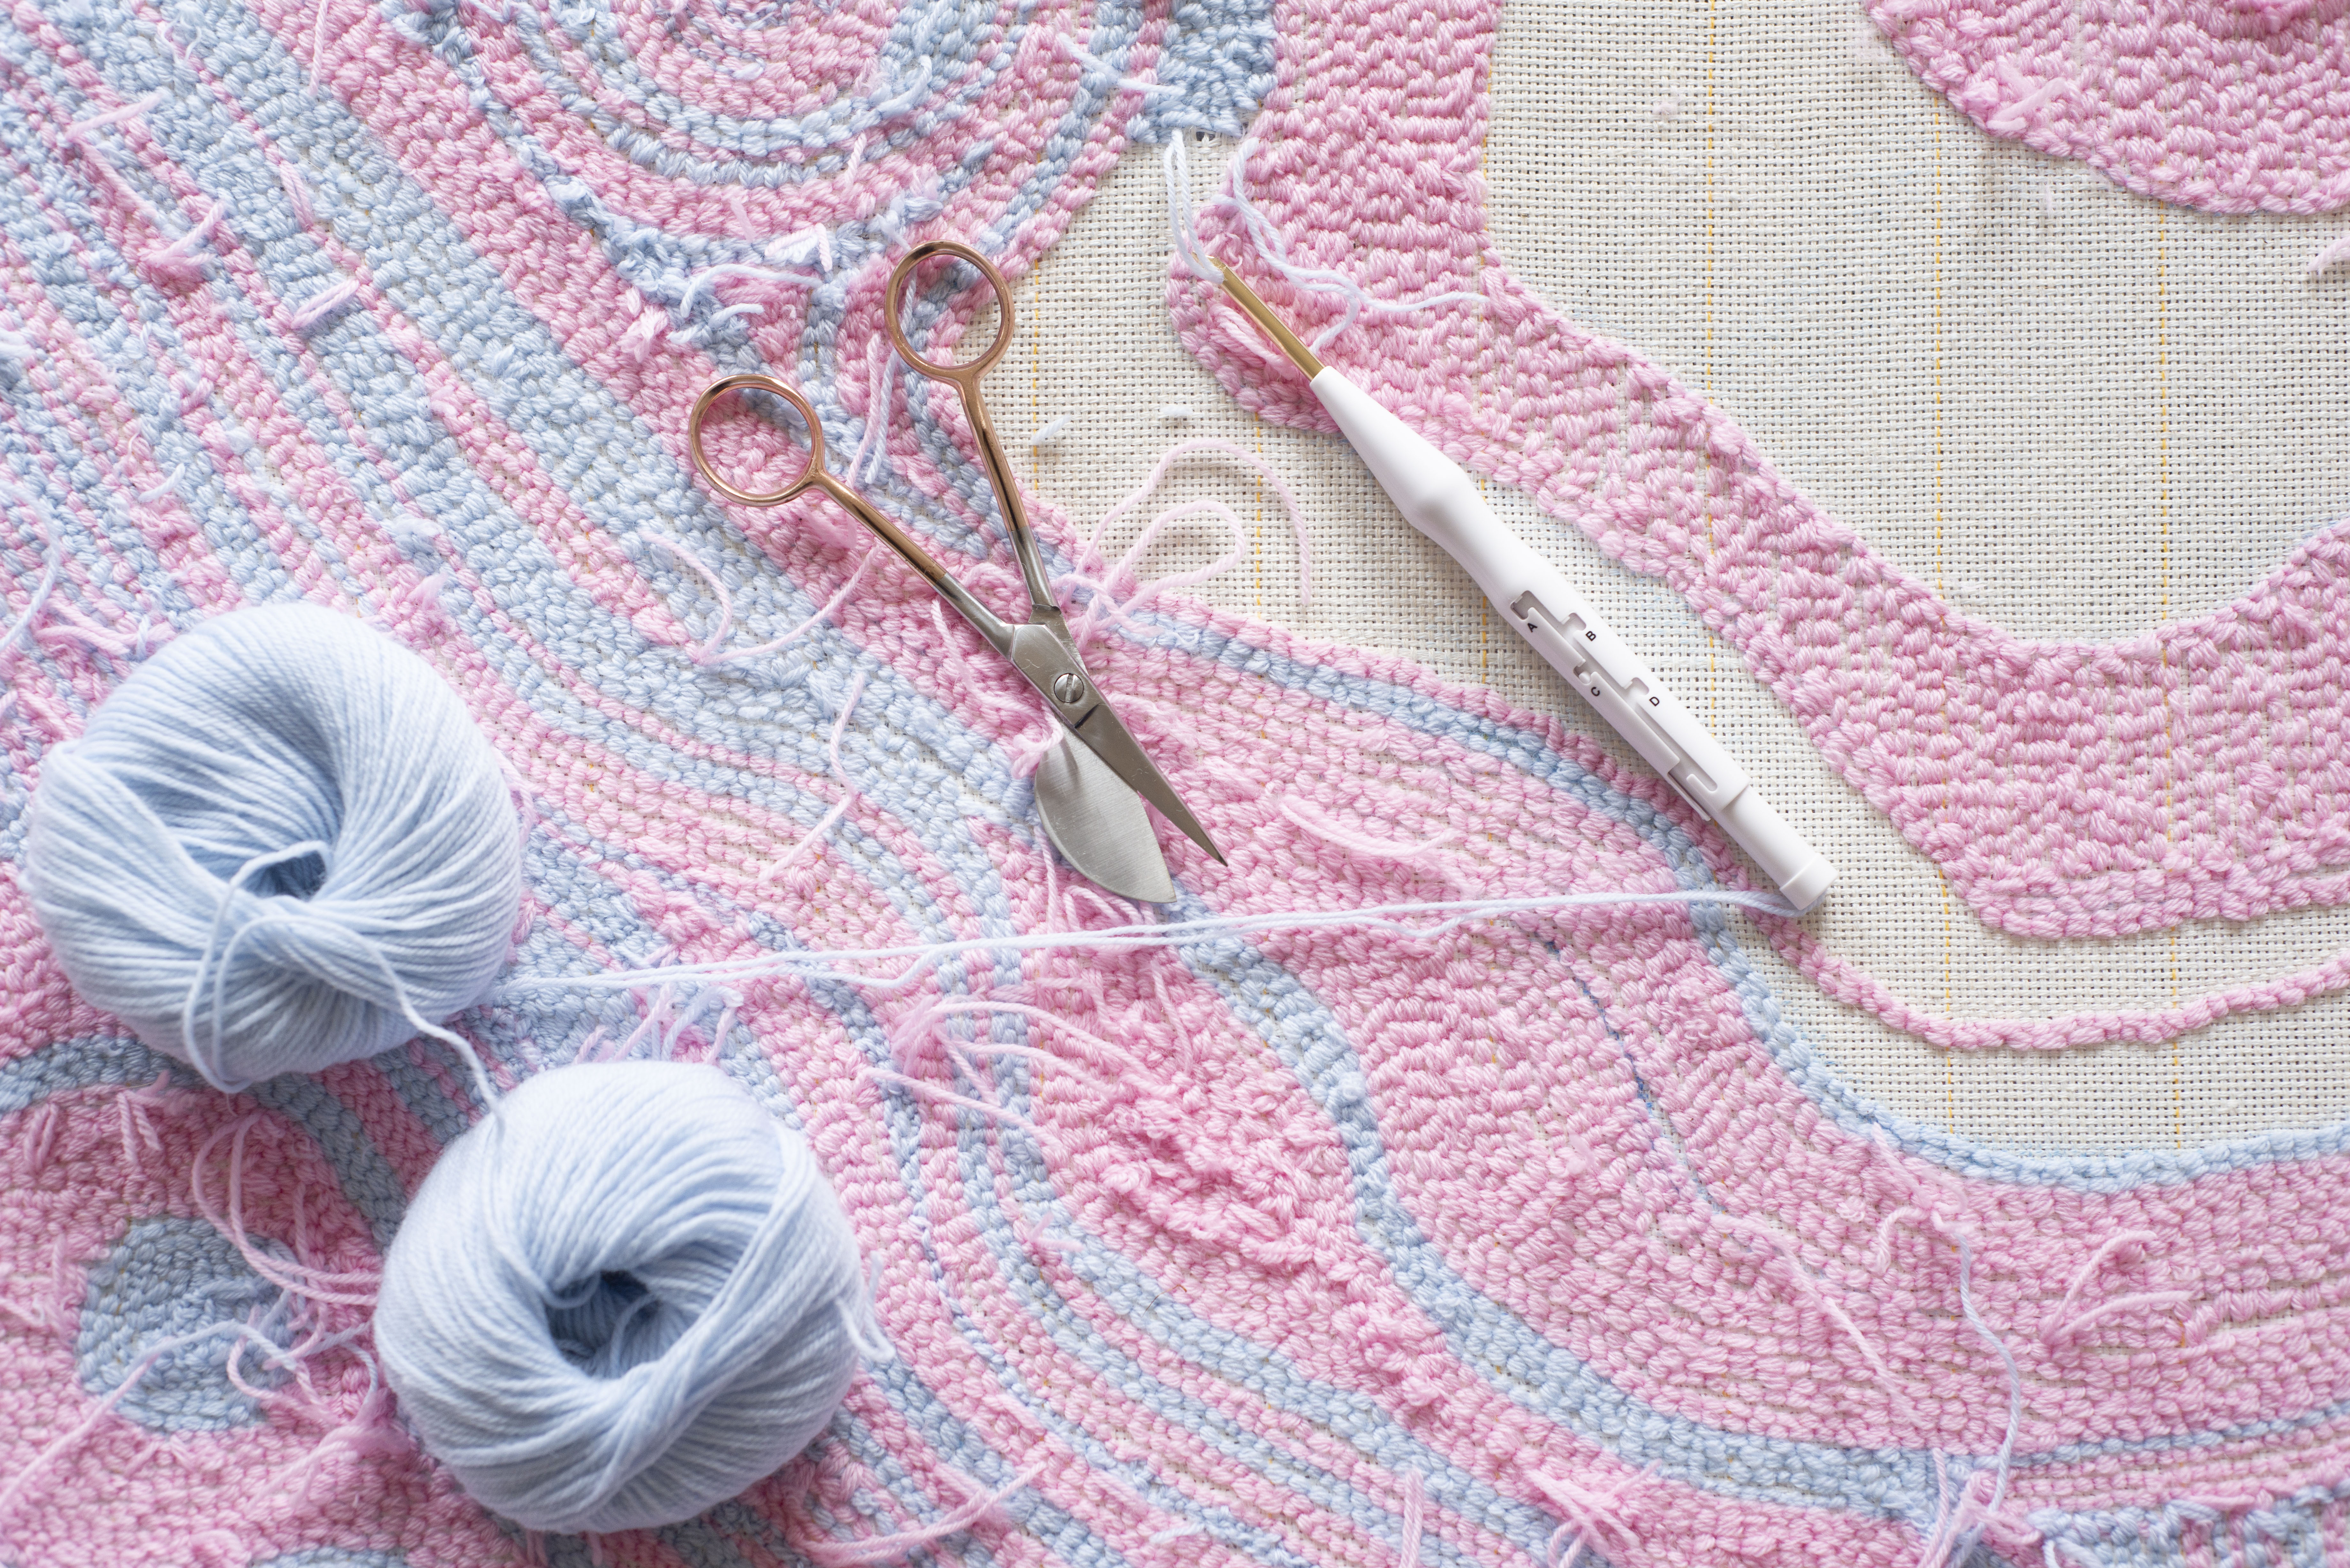 Tufting Supplies: Everything You Need to Make Your Own Rugs